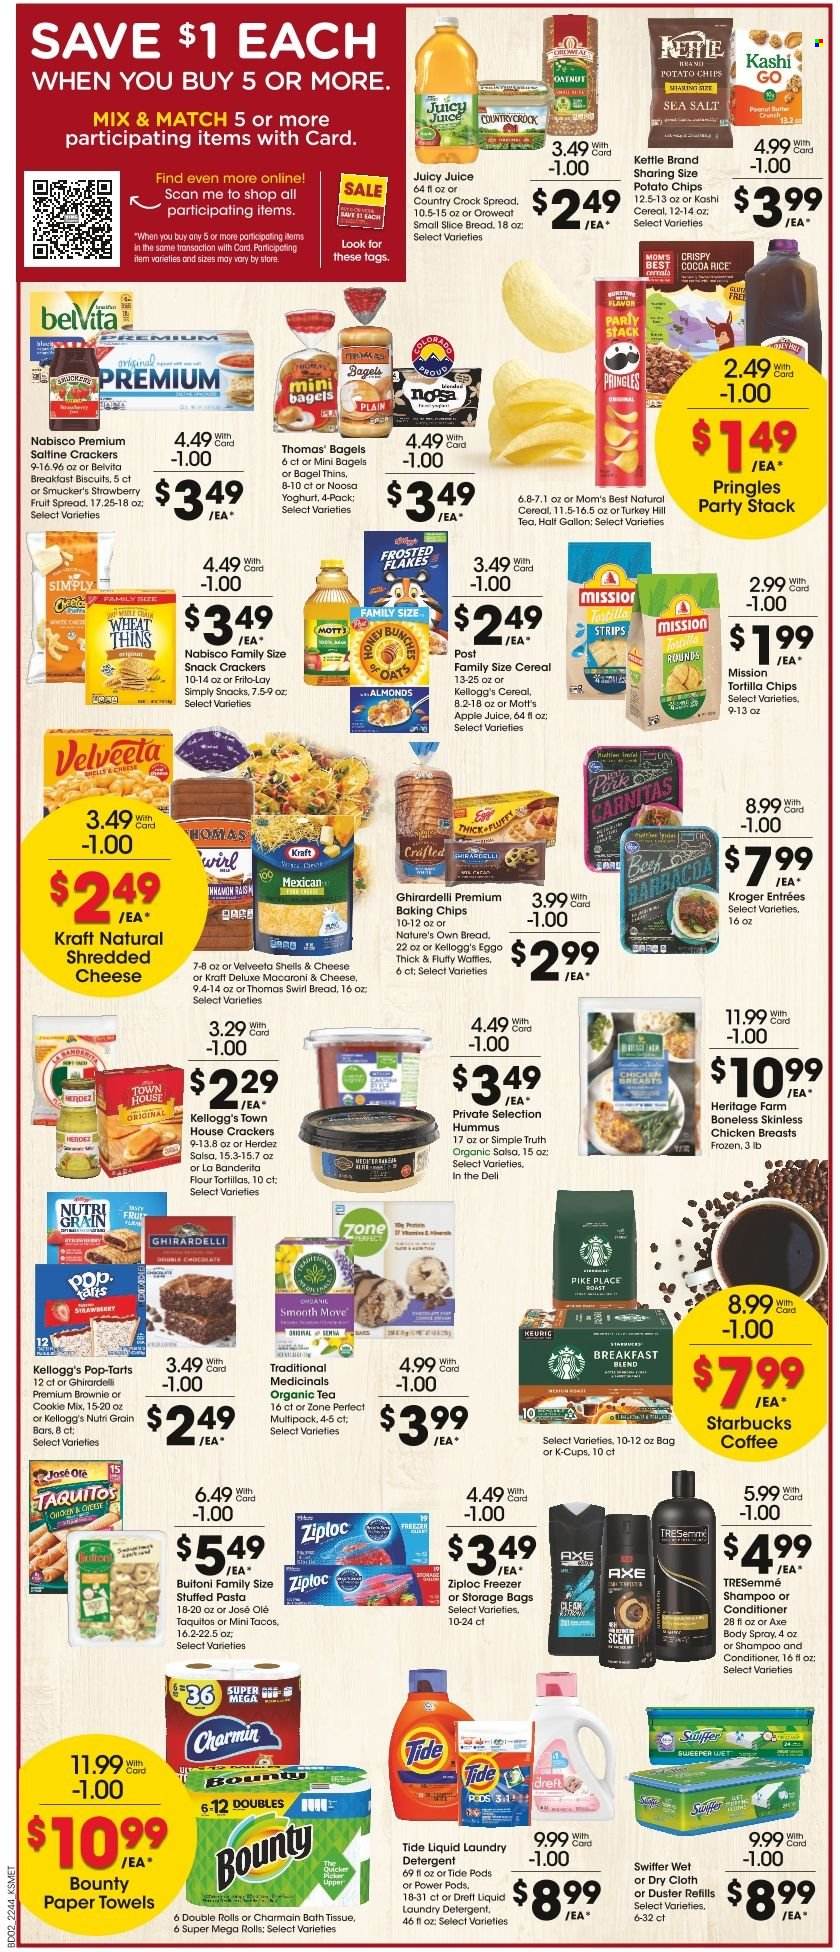 thumbnail - King Soopers Flyer - 11/30/2022 - 12/06/2022 - Sales products - Minions, bagels, tacos, flour tortillas, brownies, waffles, Mott's, fish, macaroni & cheese, pasta, taquitos, Kraft®, Buitoni, hummus, shredded cheese, yoghurt, chocolate, snack, Bounty, crackers, Kellogg's, biscuit, Pop-Tarts, Ghirardelli, tortilla chips, potato chips, Pringles, Thins, Frito-Lay, oats, baking chips, cereals, Frosted Flakes, belVita, Mom's Best, cocoa rice, Zone Perfect, Nutri-Grain, salsa, peanut butter, almonds, apple juice, juice, tea, coffee, Starbucks, coffee capsules, K-Cups, breakfast blend, chicken breasts, bath tissue, kitchen towels, paper towels, Charmin, detergent, Swiffer, Tide, laundry detergent, shampoo, conditioner, TRESemmé, body spray, Axe, Ziploc, storage bag, duster, freezer, Nature's Own. Page 2.